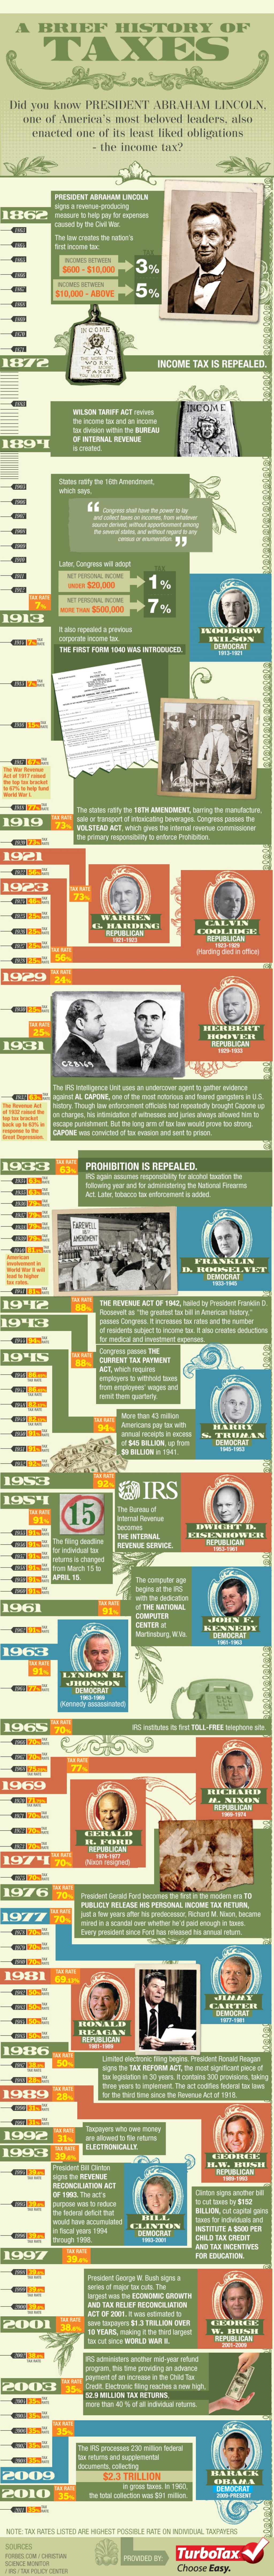 history-of-US-taxes-infographic-657